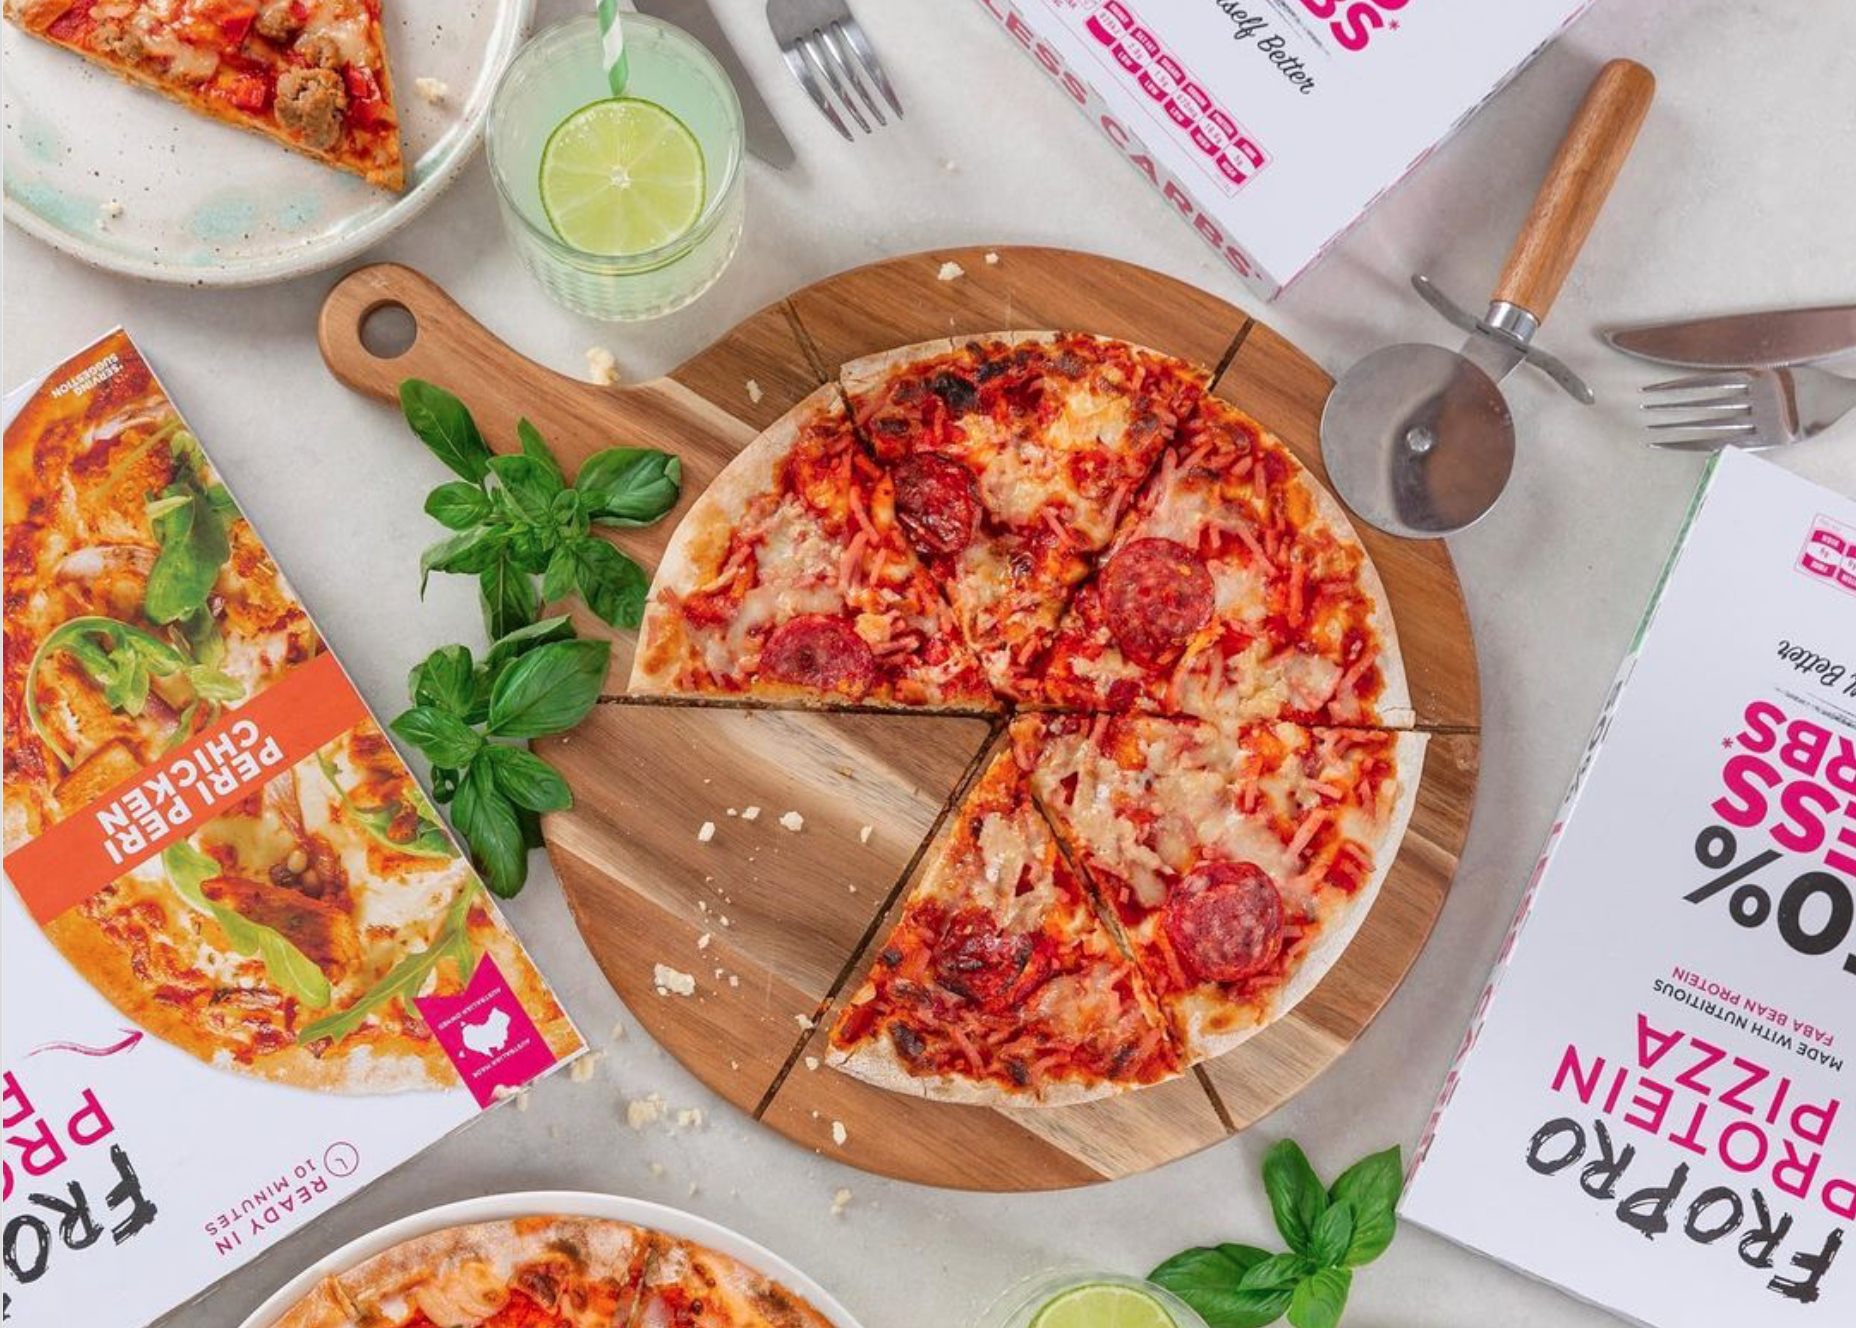 FroPro is baking history with their all new Protein Pizza Image